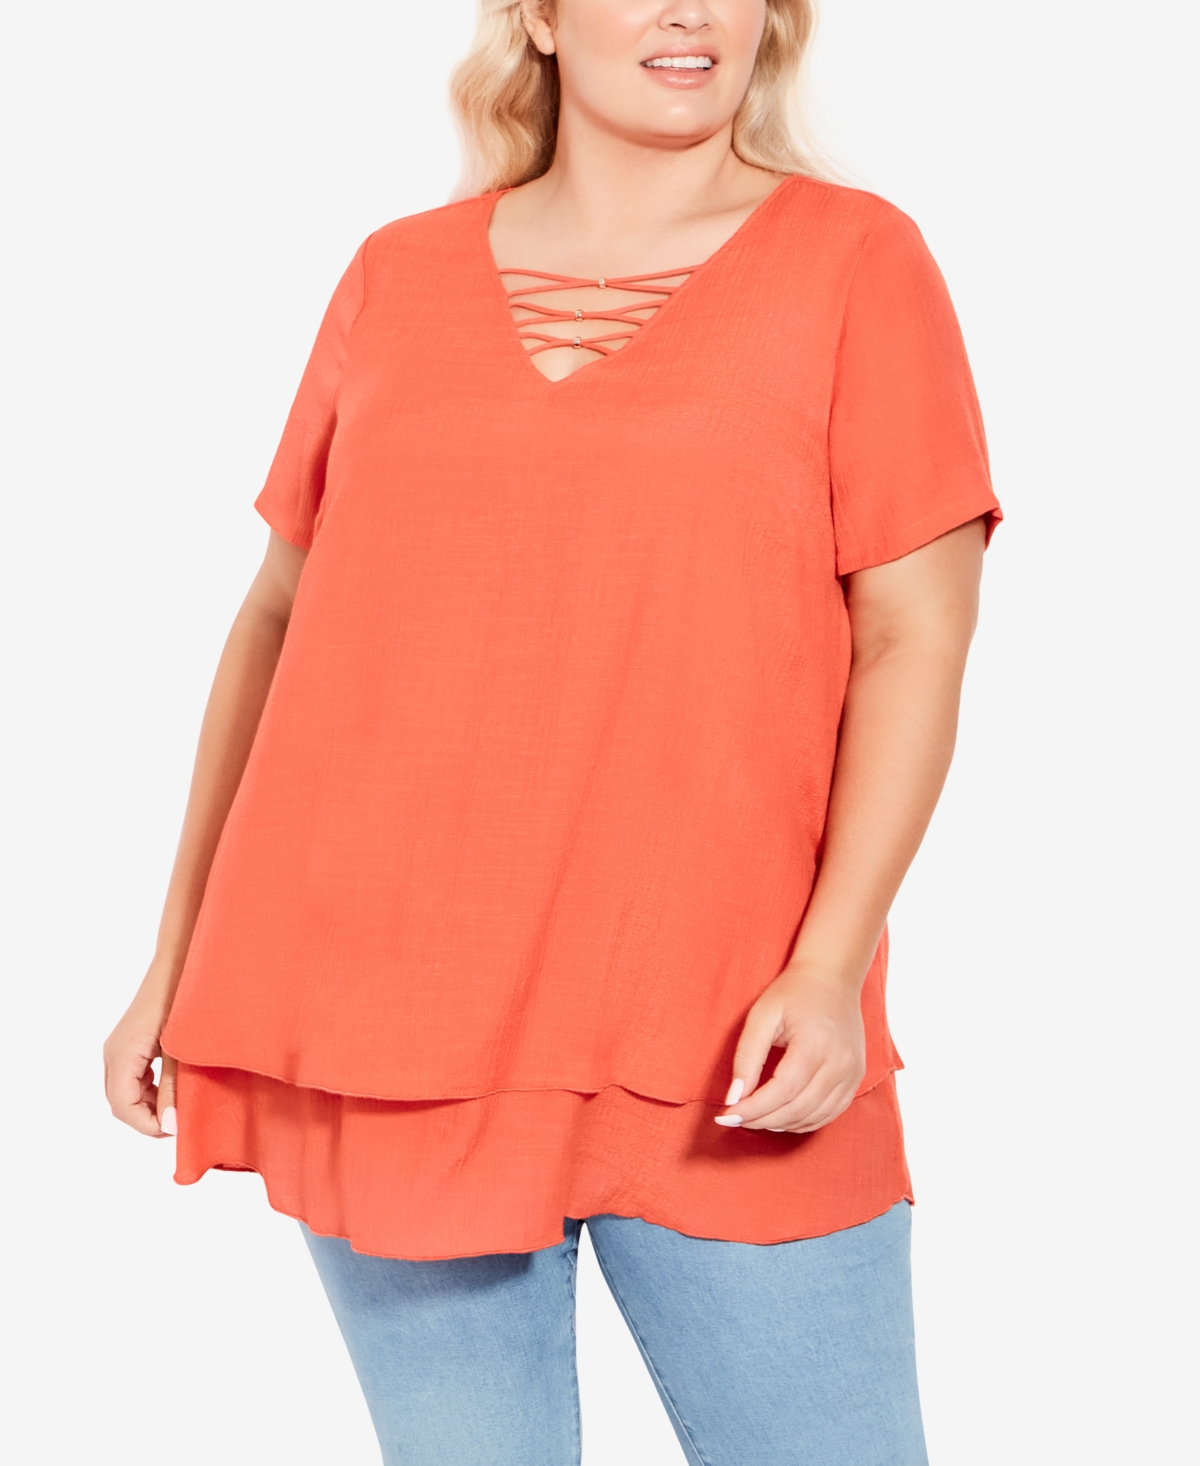 AVENUE PLUS SIZE MARION CAGED TUNIC TOP